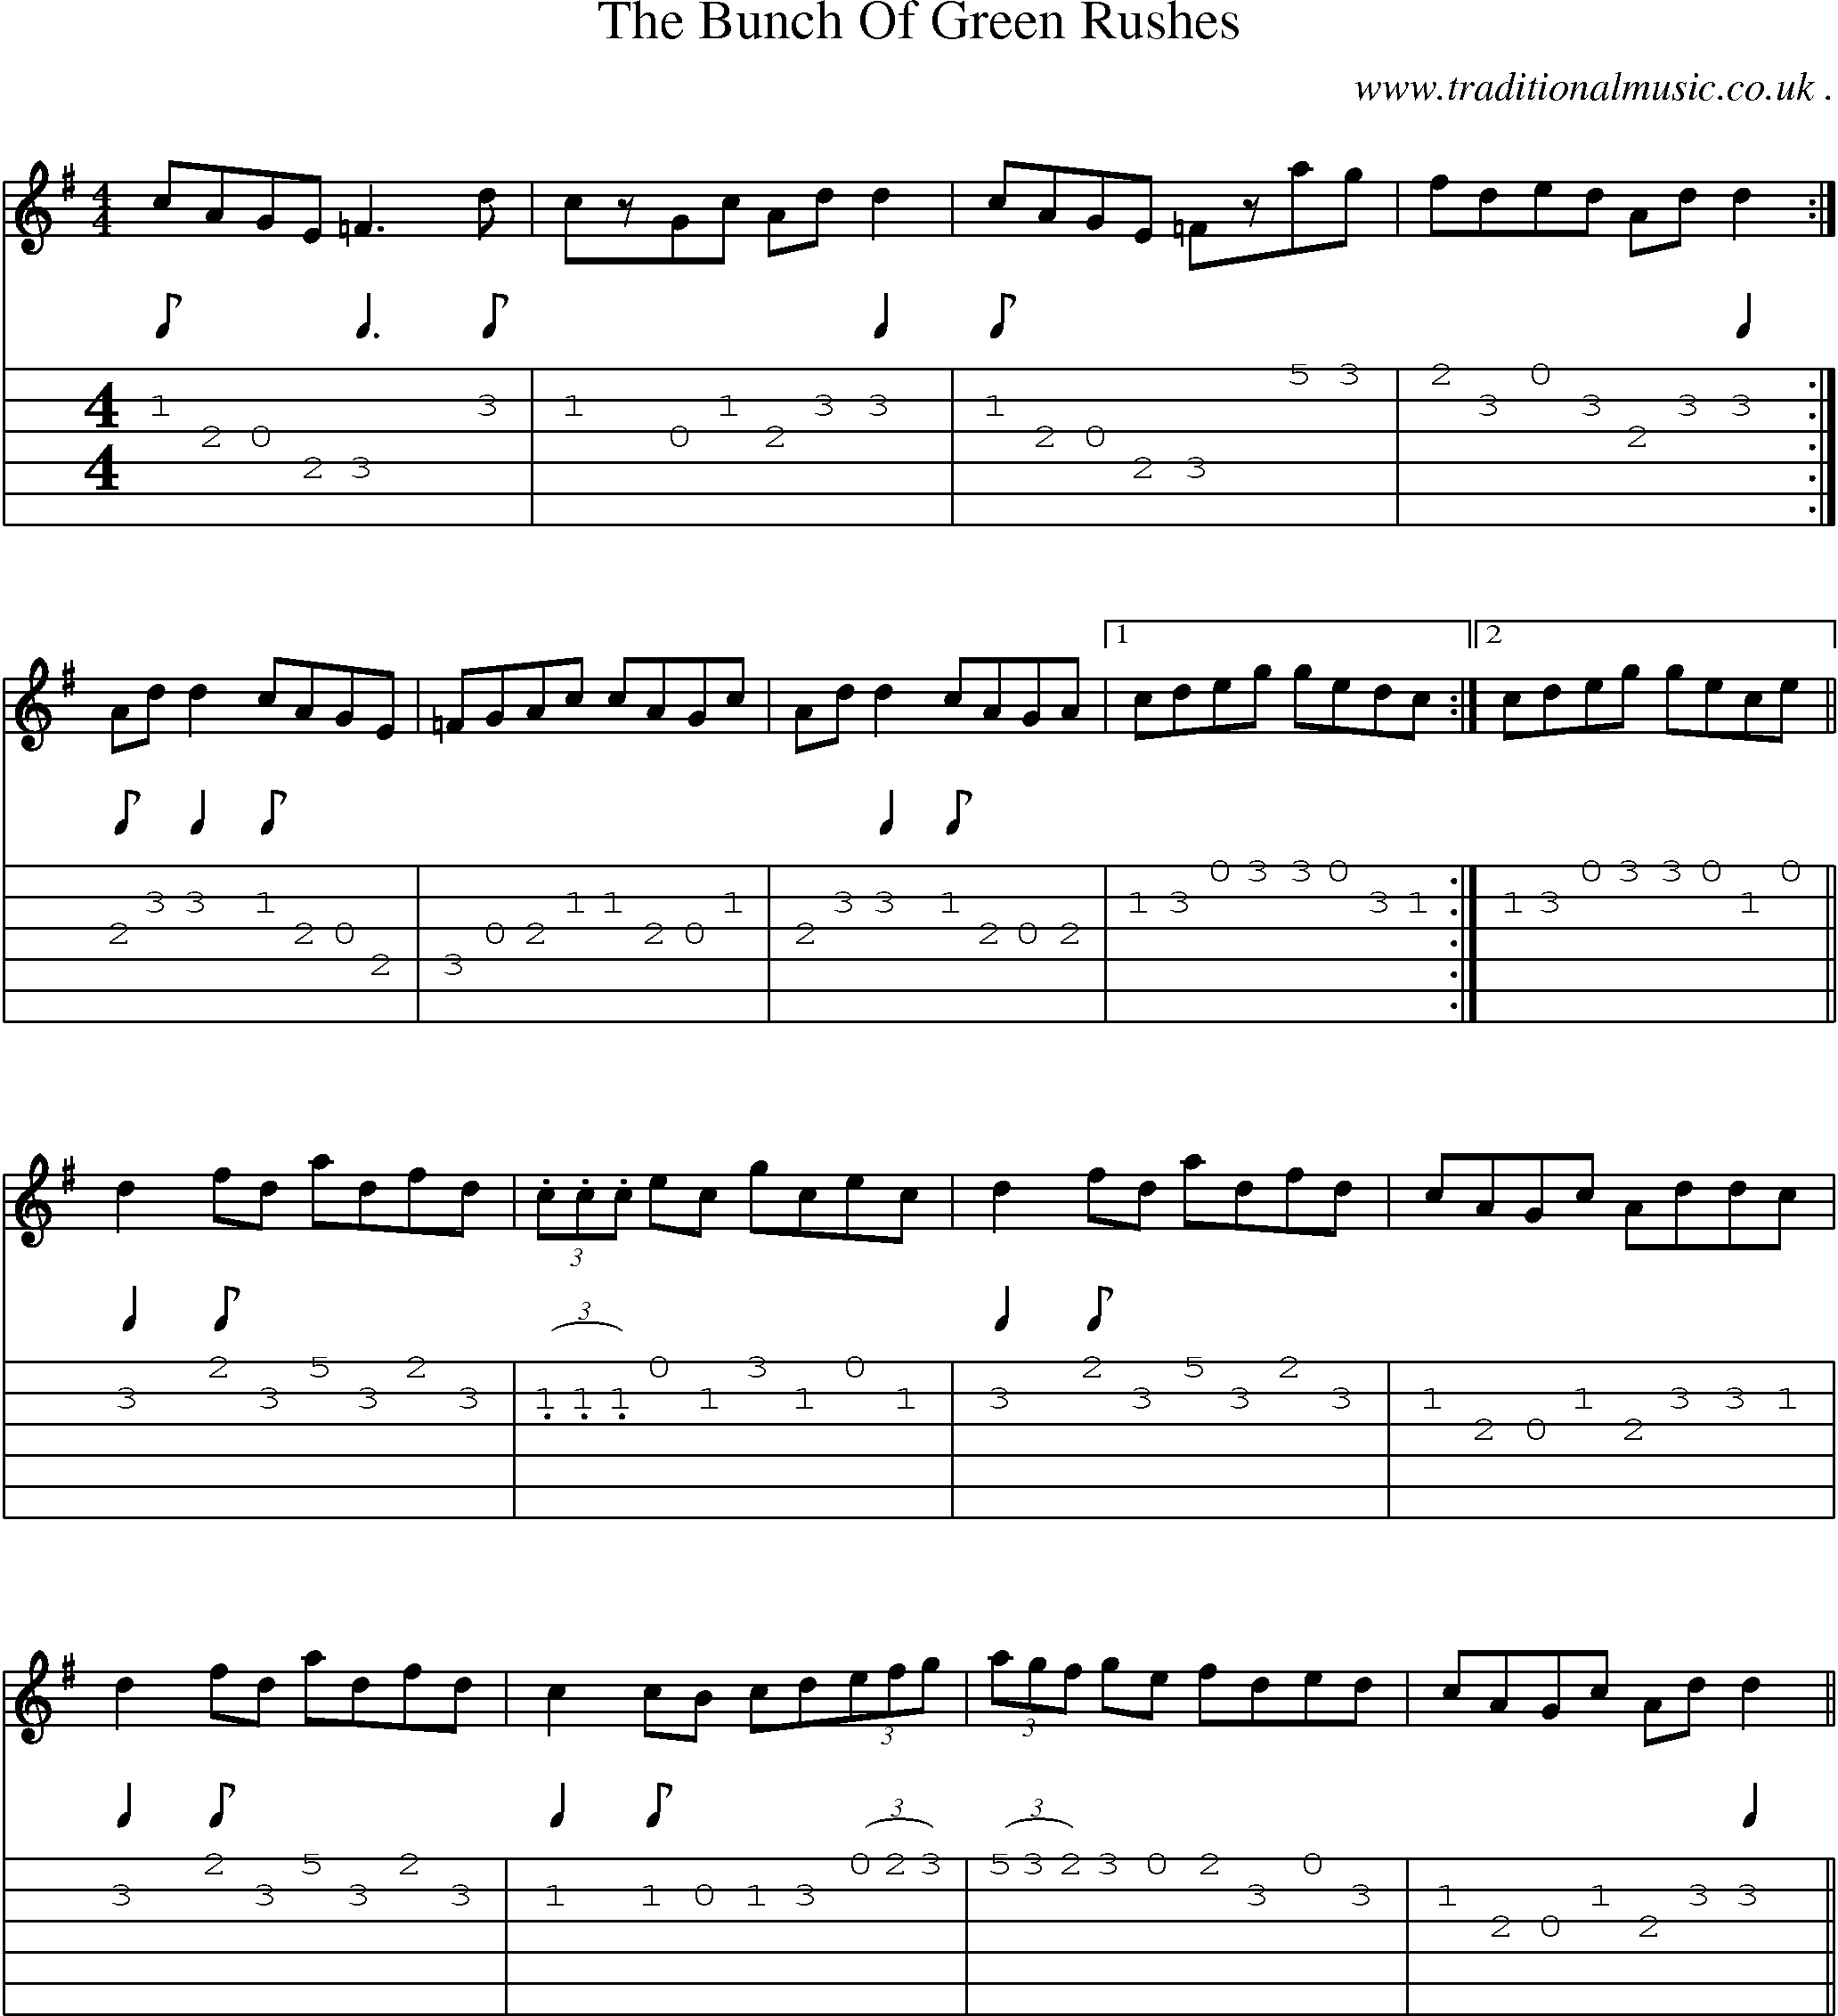 Sheet-Music and Guitar Tabs for The Bunch Of Green Rushes